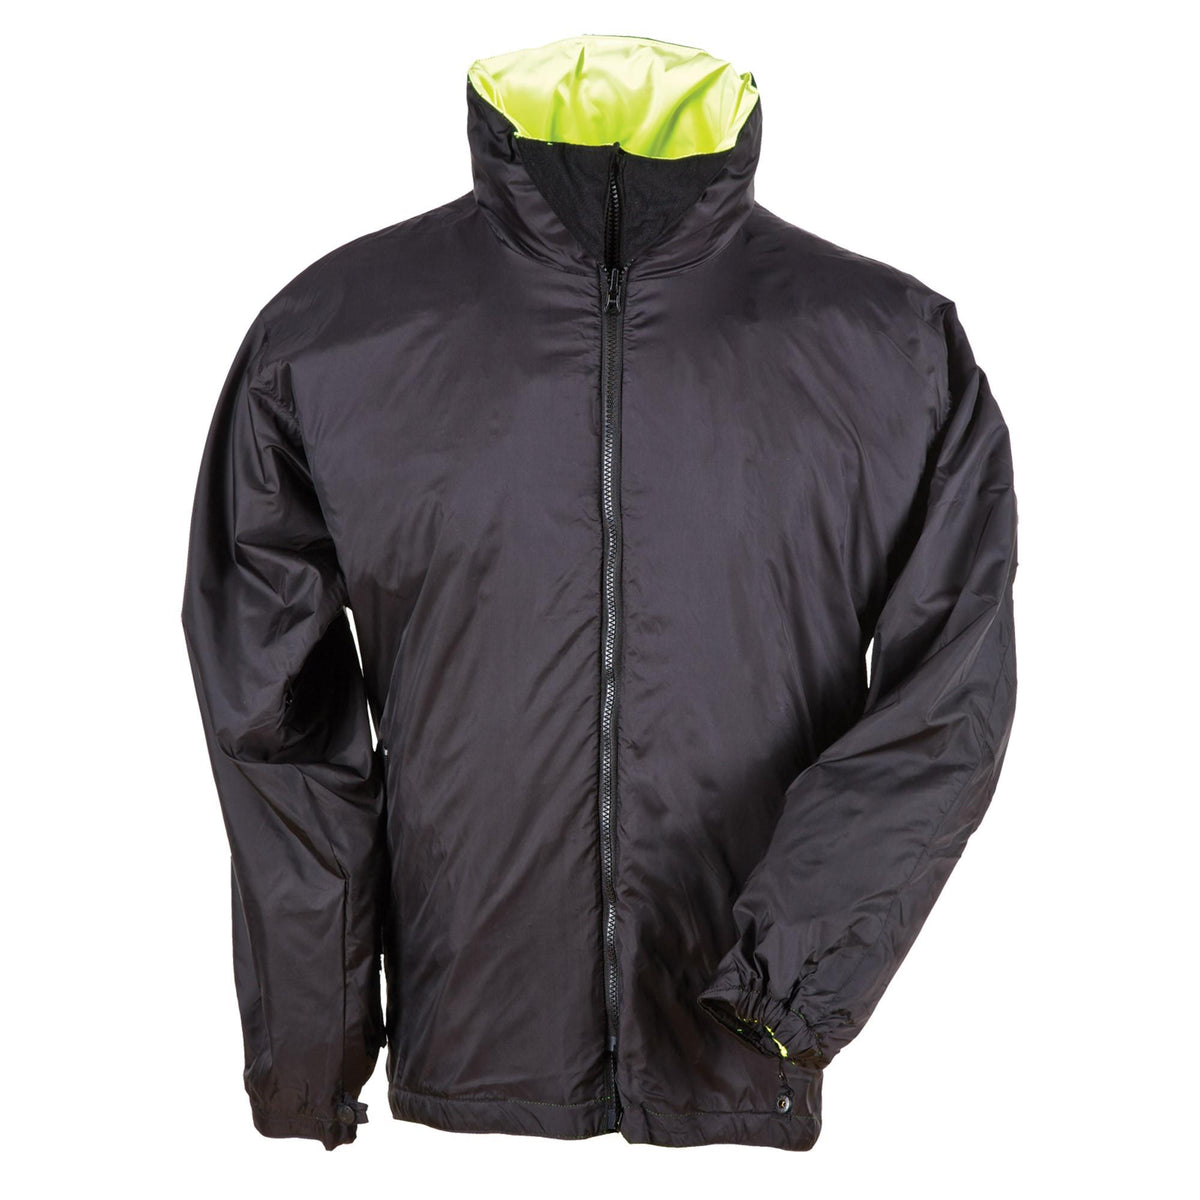 5.11 3 in 1 Reversible High-Visibility Parka